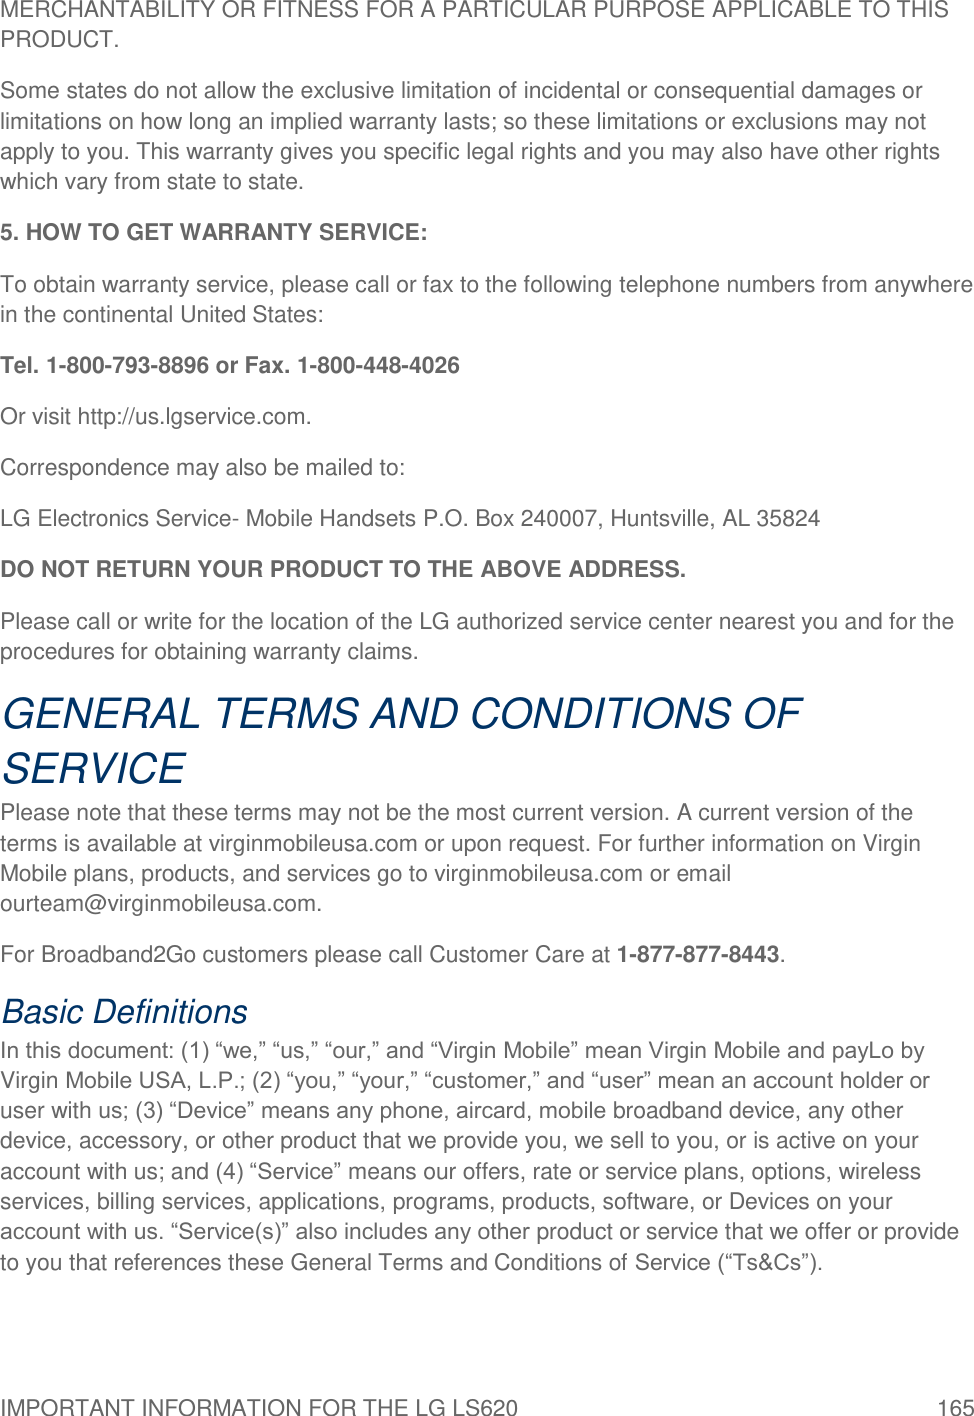 IMPORTANT INFORMATION FOR THE LG LS620  165 MERCHANTABILITY OR FITNESS FOR A PARTICULAR PURPOSE APPLICABLE TO THIS PRODUCT. Some states do not allow the exclusive limitation of incidental or consequential damages or limitations on how long an implied warranty lasts; so these limitations or exclusions may not apply to you. This warranty gives you specific legal rights and you may also have other rights which vary from state to state. 5. HOW TO GET WARRANTY SERVICE: To obtain warranty service, please call or fax to the following telephone numbers from anywhere in the continental United States: Tel. 1-800-793-8896 or Fax. 1-800-448-4026 Or visit http://us.lgservice.com. Correspondence may also be mailed to: LG Electronics Service- Mobile Handsets P.O. Box 240007, Huntsville, AL 35824 DO NOT RETURN YOUR PRODUCT TO THE ABOVE ADDRESS. Please call or write for the location of the LG authorized service center nearest you and for the procedures for obtaining warranty claims. GENERAL TERMS AND CONDITIONS OF SERVICE Please note that these terms may not be the most current version. A current version of the terms is available at virginmobileusa.com or upon request. For further information on Virgin Mobile plans, products, and services go to virginmobileusa.com or email ourteam@virginmobileusa.com. For Broadband2Go customers please call Customer Care at 1-877-877-8443. Basic Definitions In this document: (1) ―we,‖ ―us,‖ ―our,‖ and ―Virgin Mobile‖ mean Virgin Mobile and payLo by Virgin Mobile USA, L.P.; (2) ―you,‖ ―your,‖ ―customer,‖ and ―user‖ mean an account holder or user with us; (3) ―Device‖ means any phone, aircard, mobile broadband device, any other device, accessory, or other product that we provide you, we sell to you, or is active on your account with us; and (4) ―Service‖ means our offers, rate or service plans, options, wireless services, billing services, applications, programs, products, software, or Devices on your account with us. ―Service(s)‖ also includes any other product or service that we offer or provide to you that references these General Terms and Conditions of Service (―Ts&amp;Cs‖). 